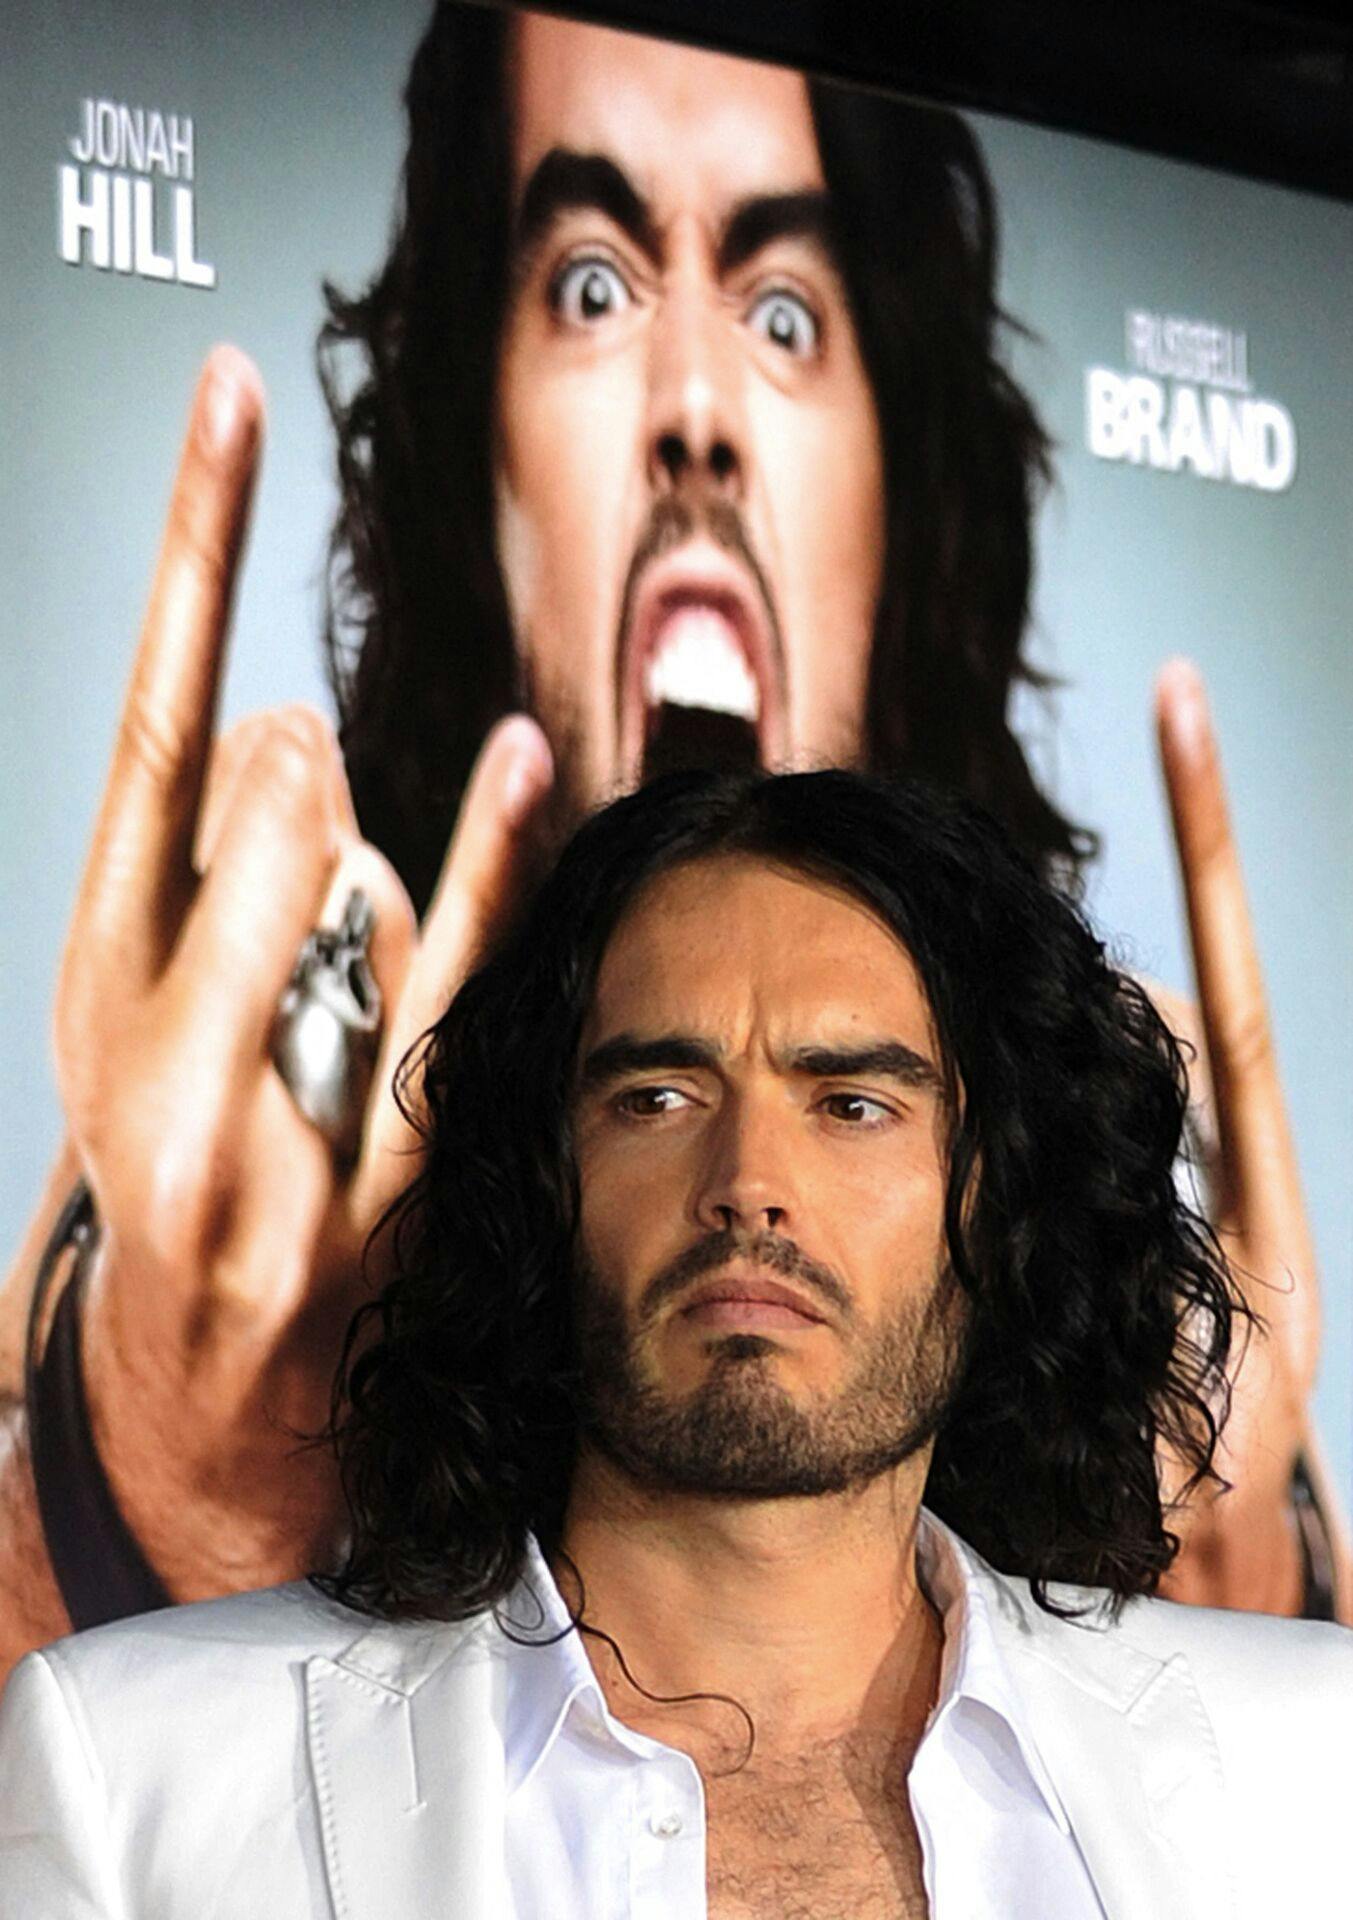 (FILES) Actor Russell Brand poses on the red carpet as he arrives for the premiere of the comedy movie "Get Him to the Greek" from Universal Pictures at the Greek Theatre in Los Angeles on May 25, 2010. British comedian and actor Russell Brand has been accused of rape, sexual assaults and emotional abuse during a seven-year period, according to the results of a media investigation published on September 16, 2023. (Photo by MARK RALSTON / AFP)